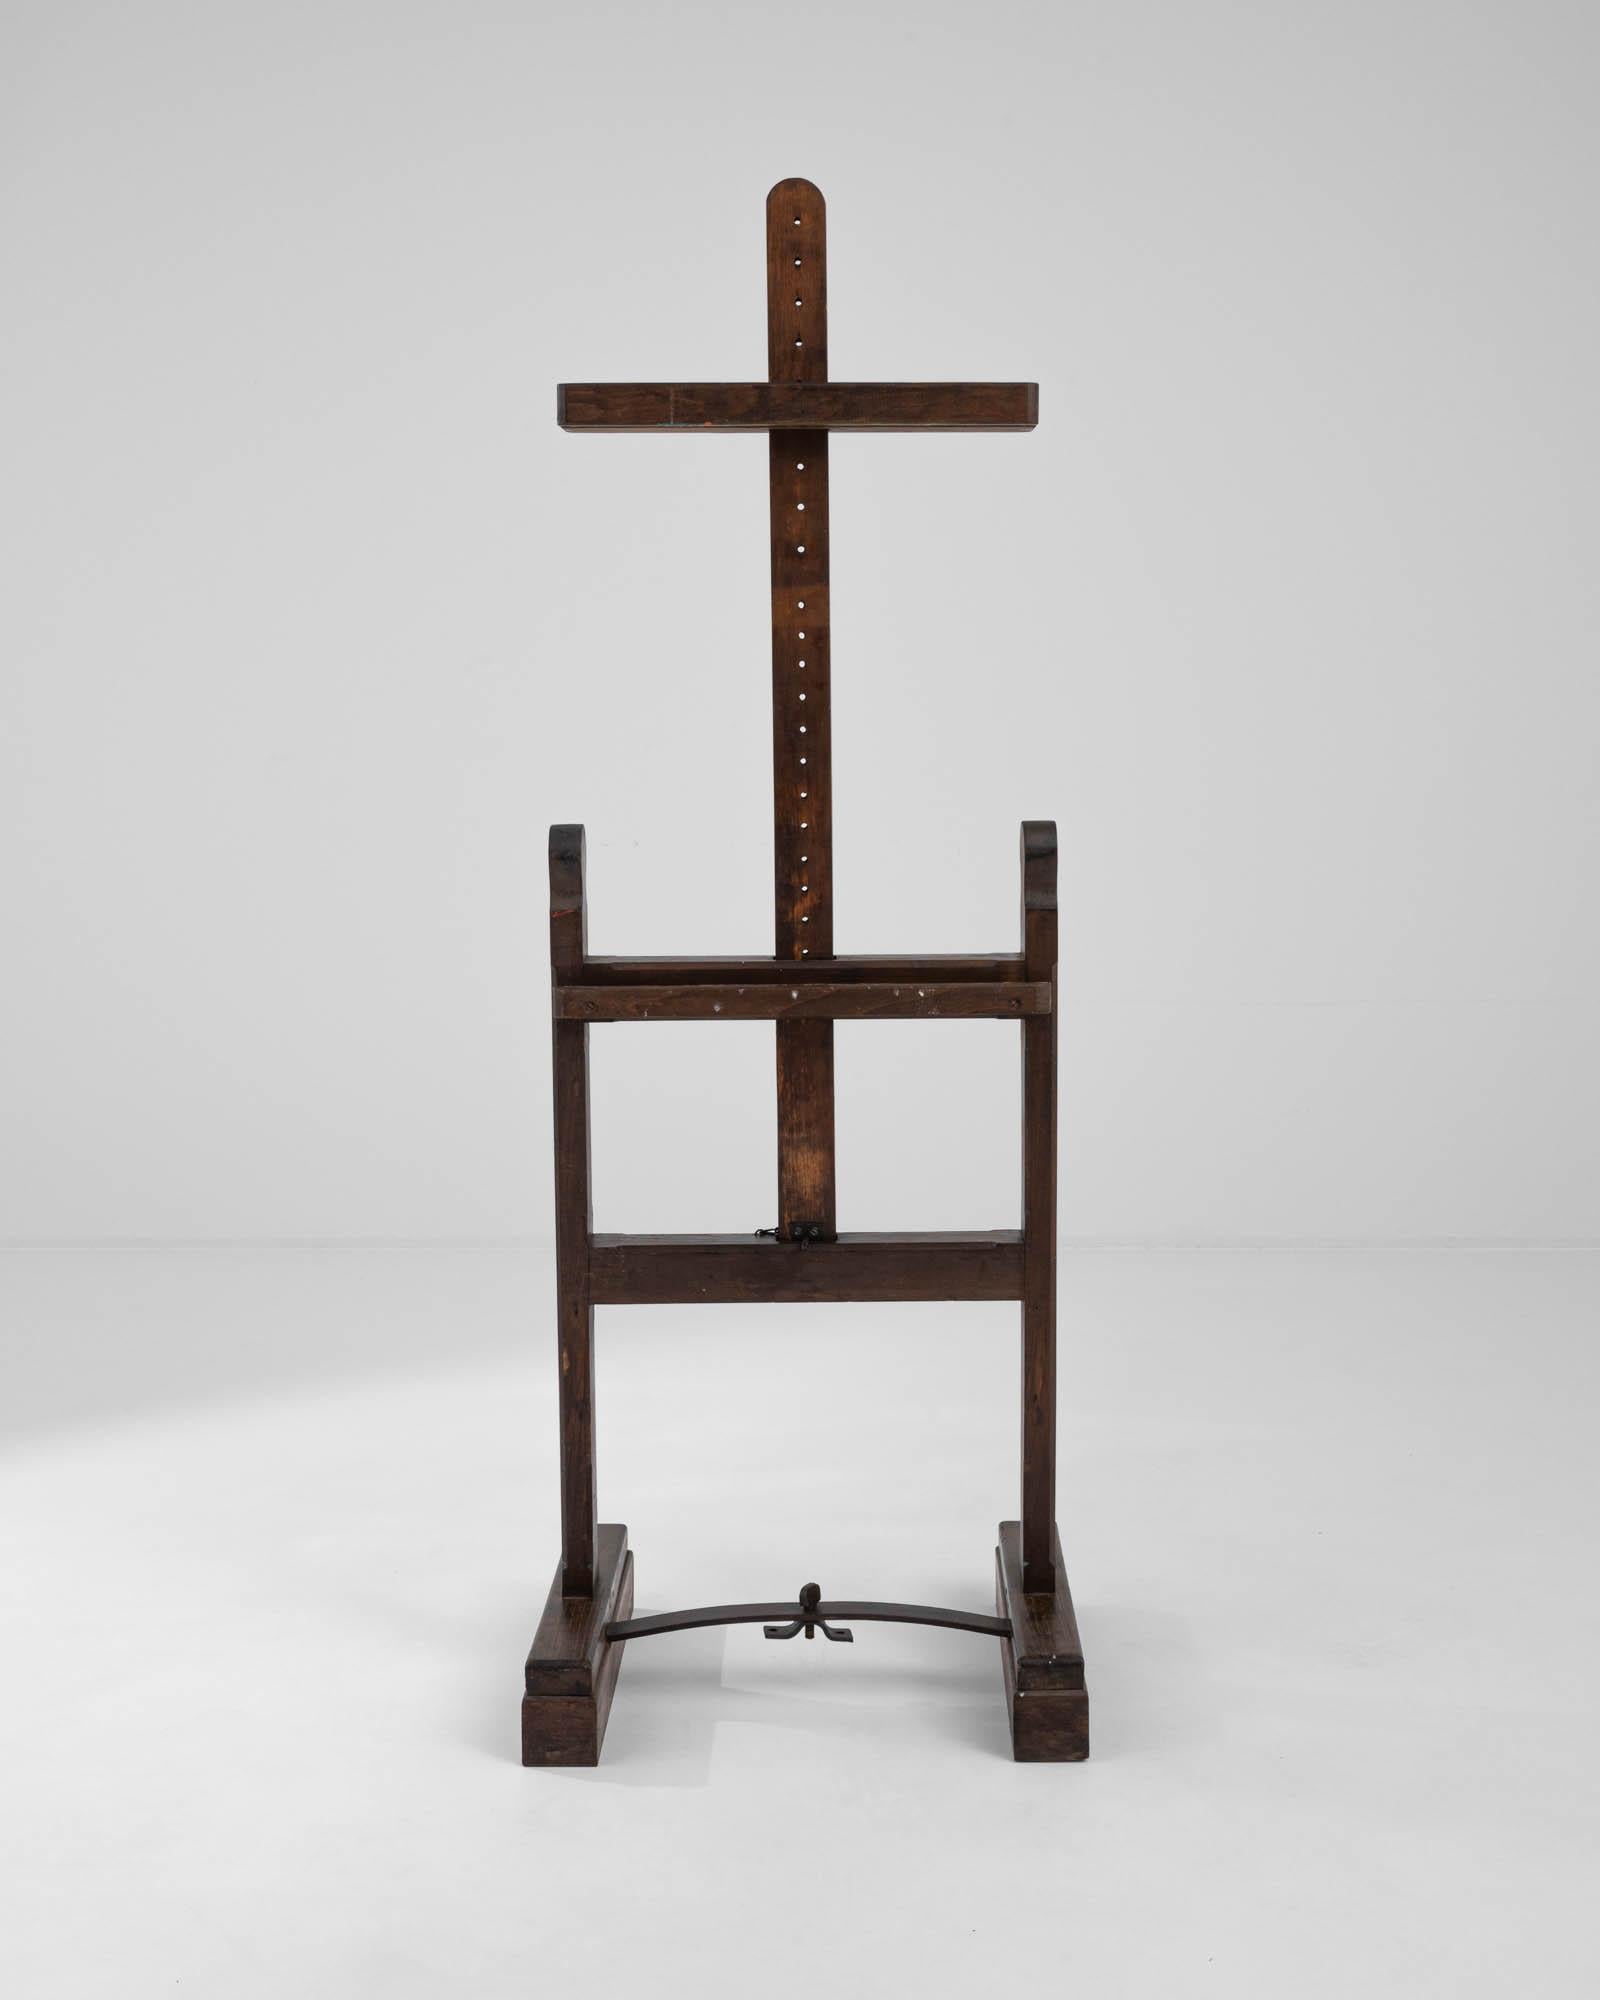 This distinctive cross-shaped easel was crafted from dark, refined wood in France during the 20th century. Featuring a traditional H-frame adorned with carved finials, it stands resolutely on its sturdy rectangular feet, connected by a metal side